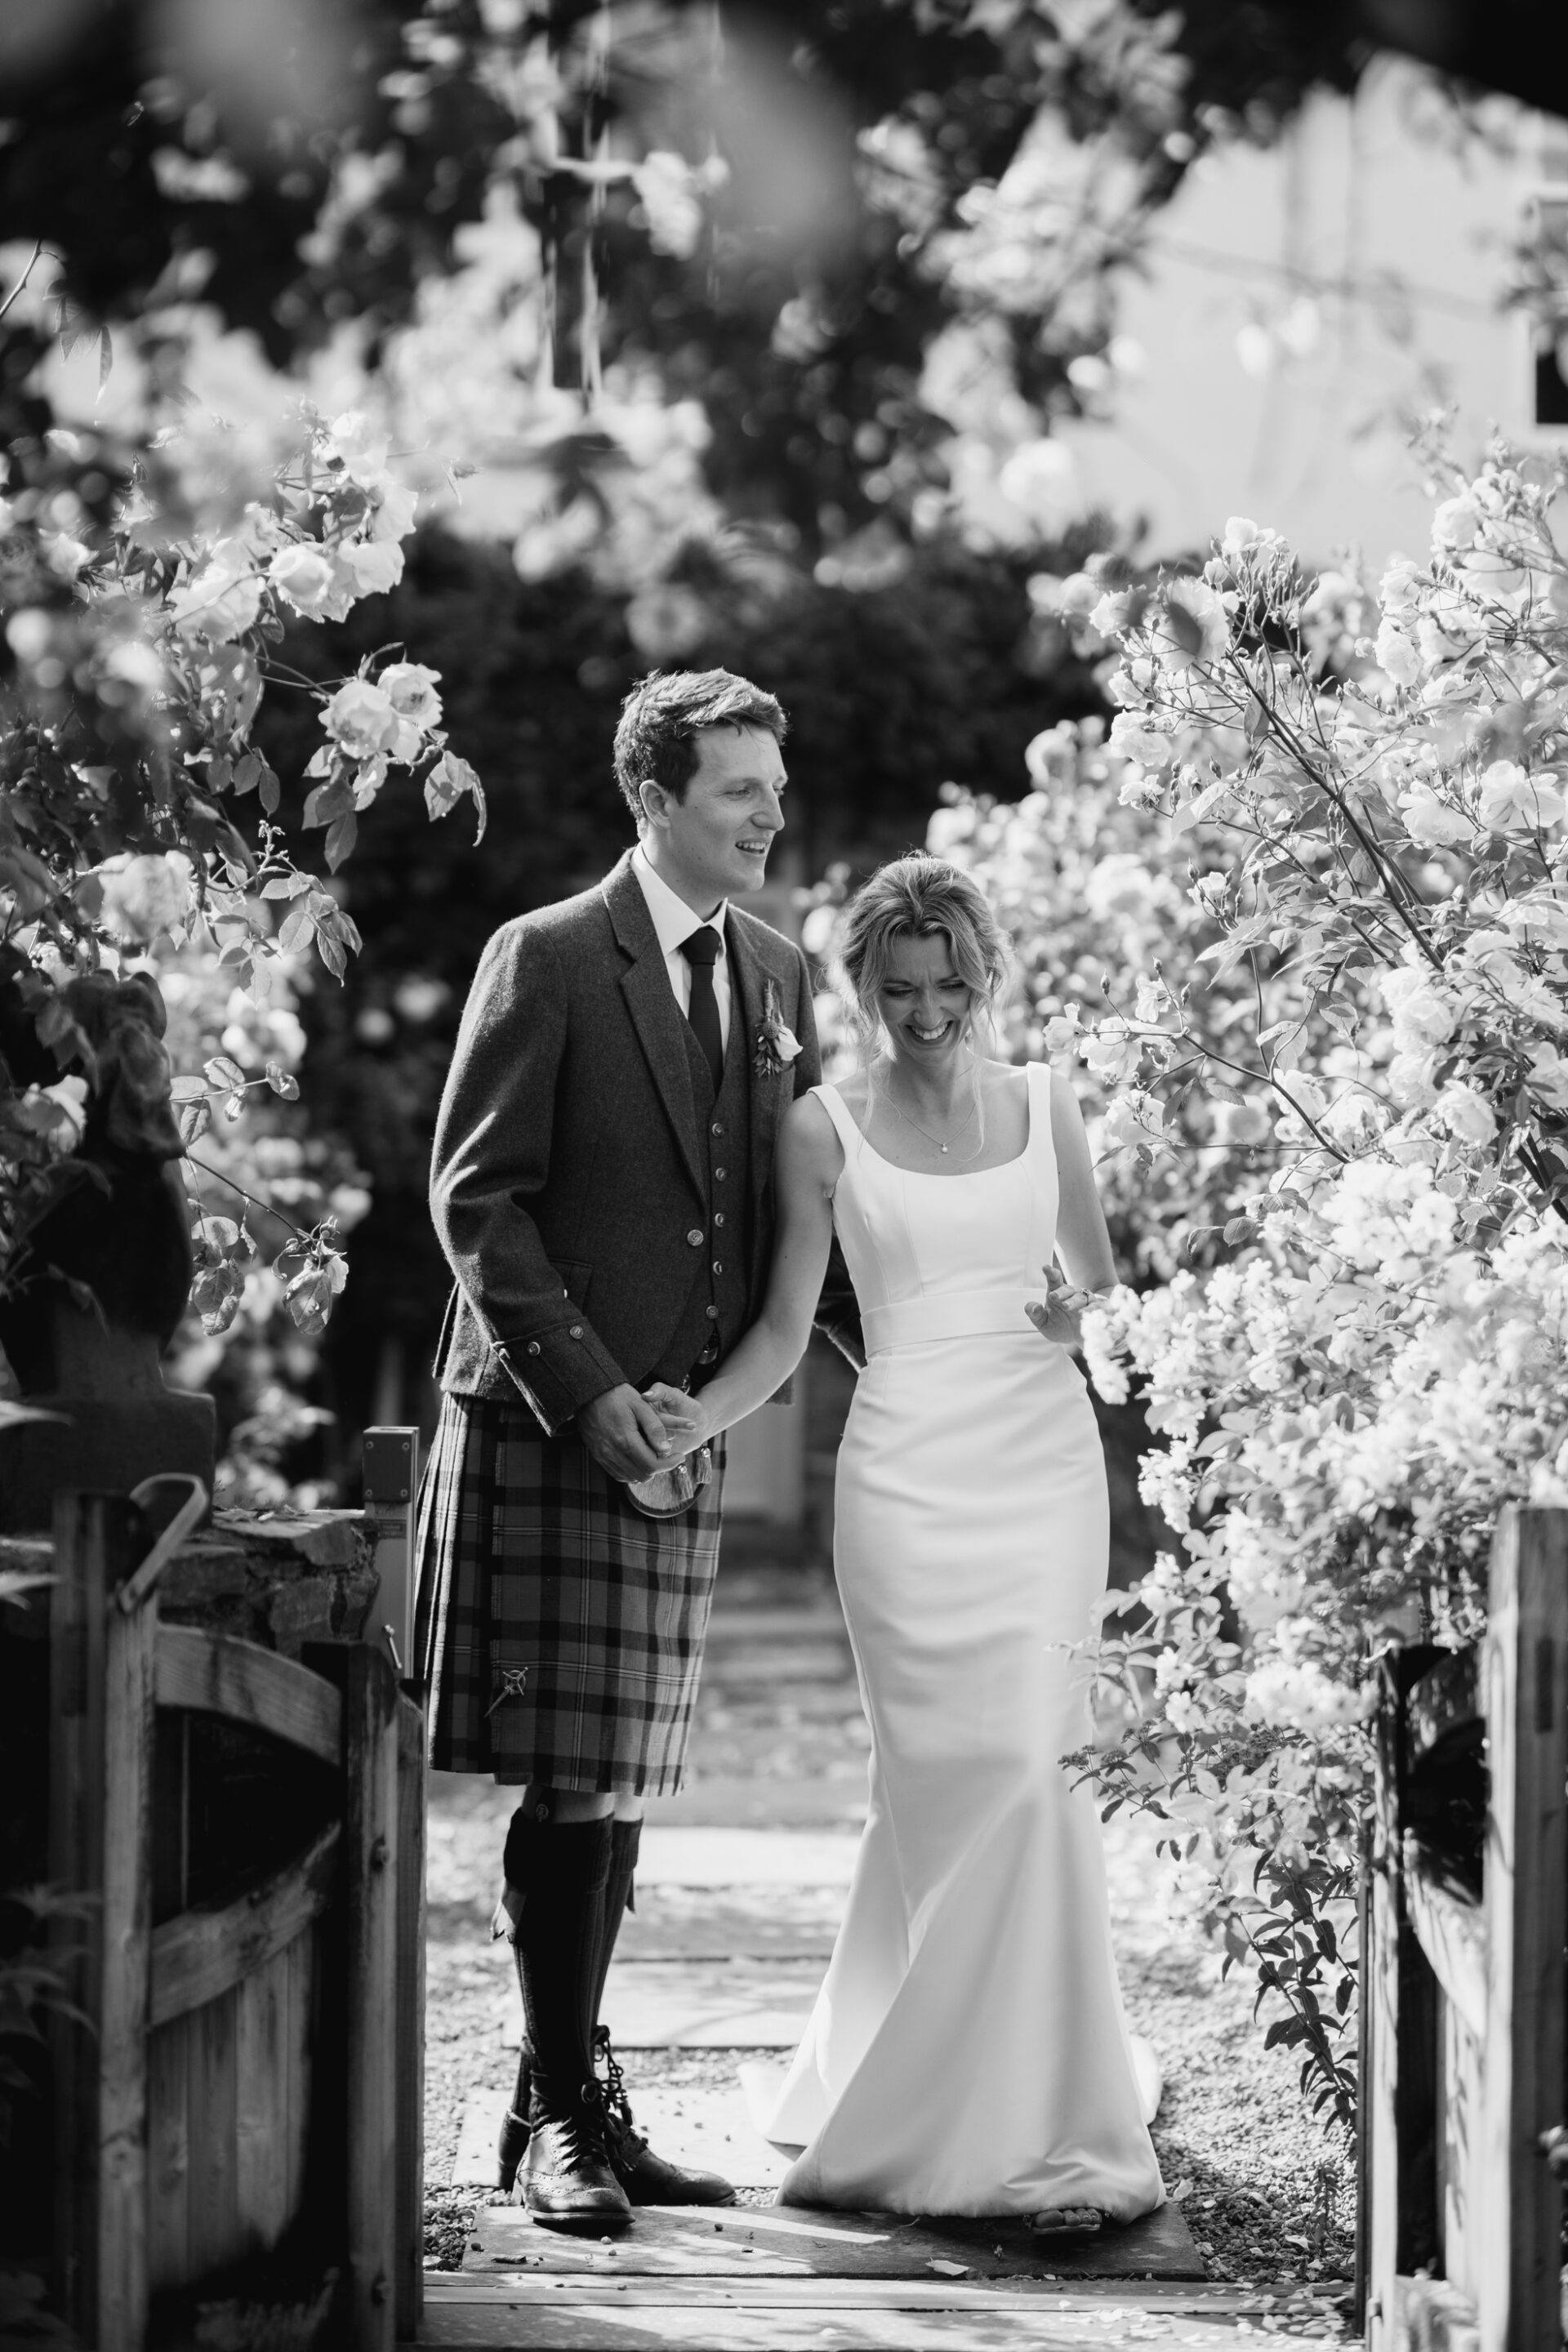 The bride and groom walk amongst the flowers at their English garden party wedding